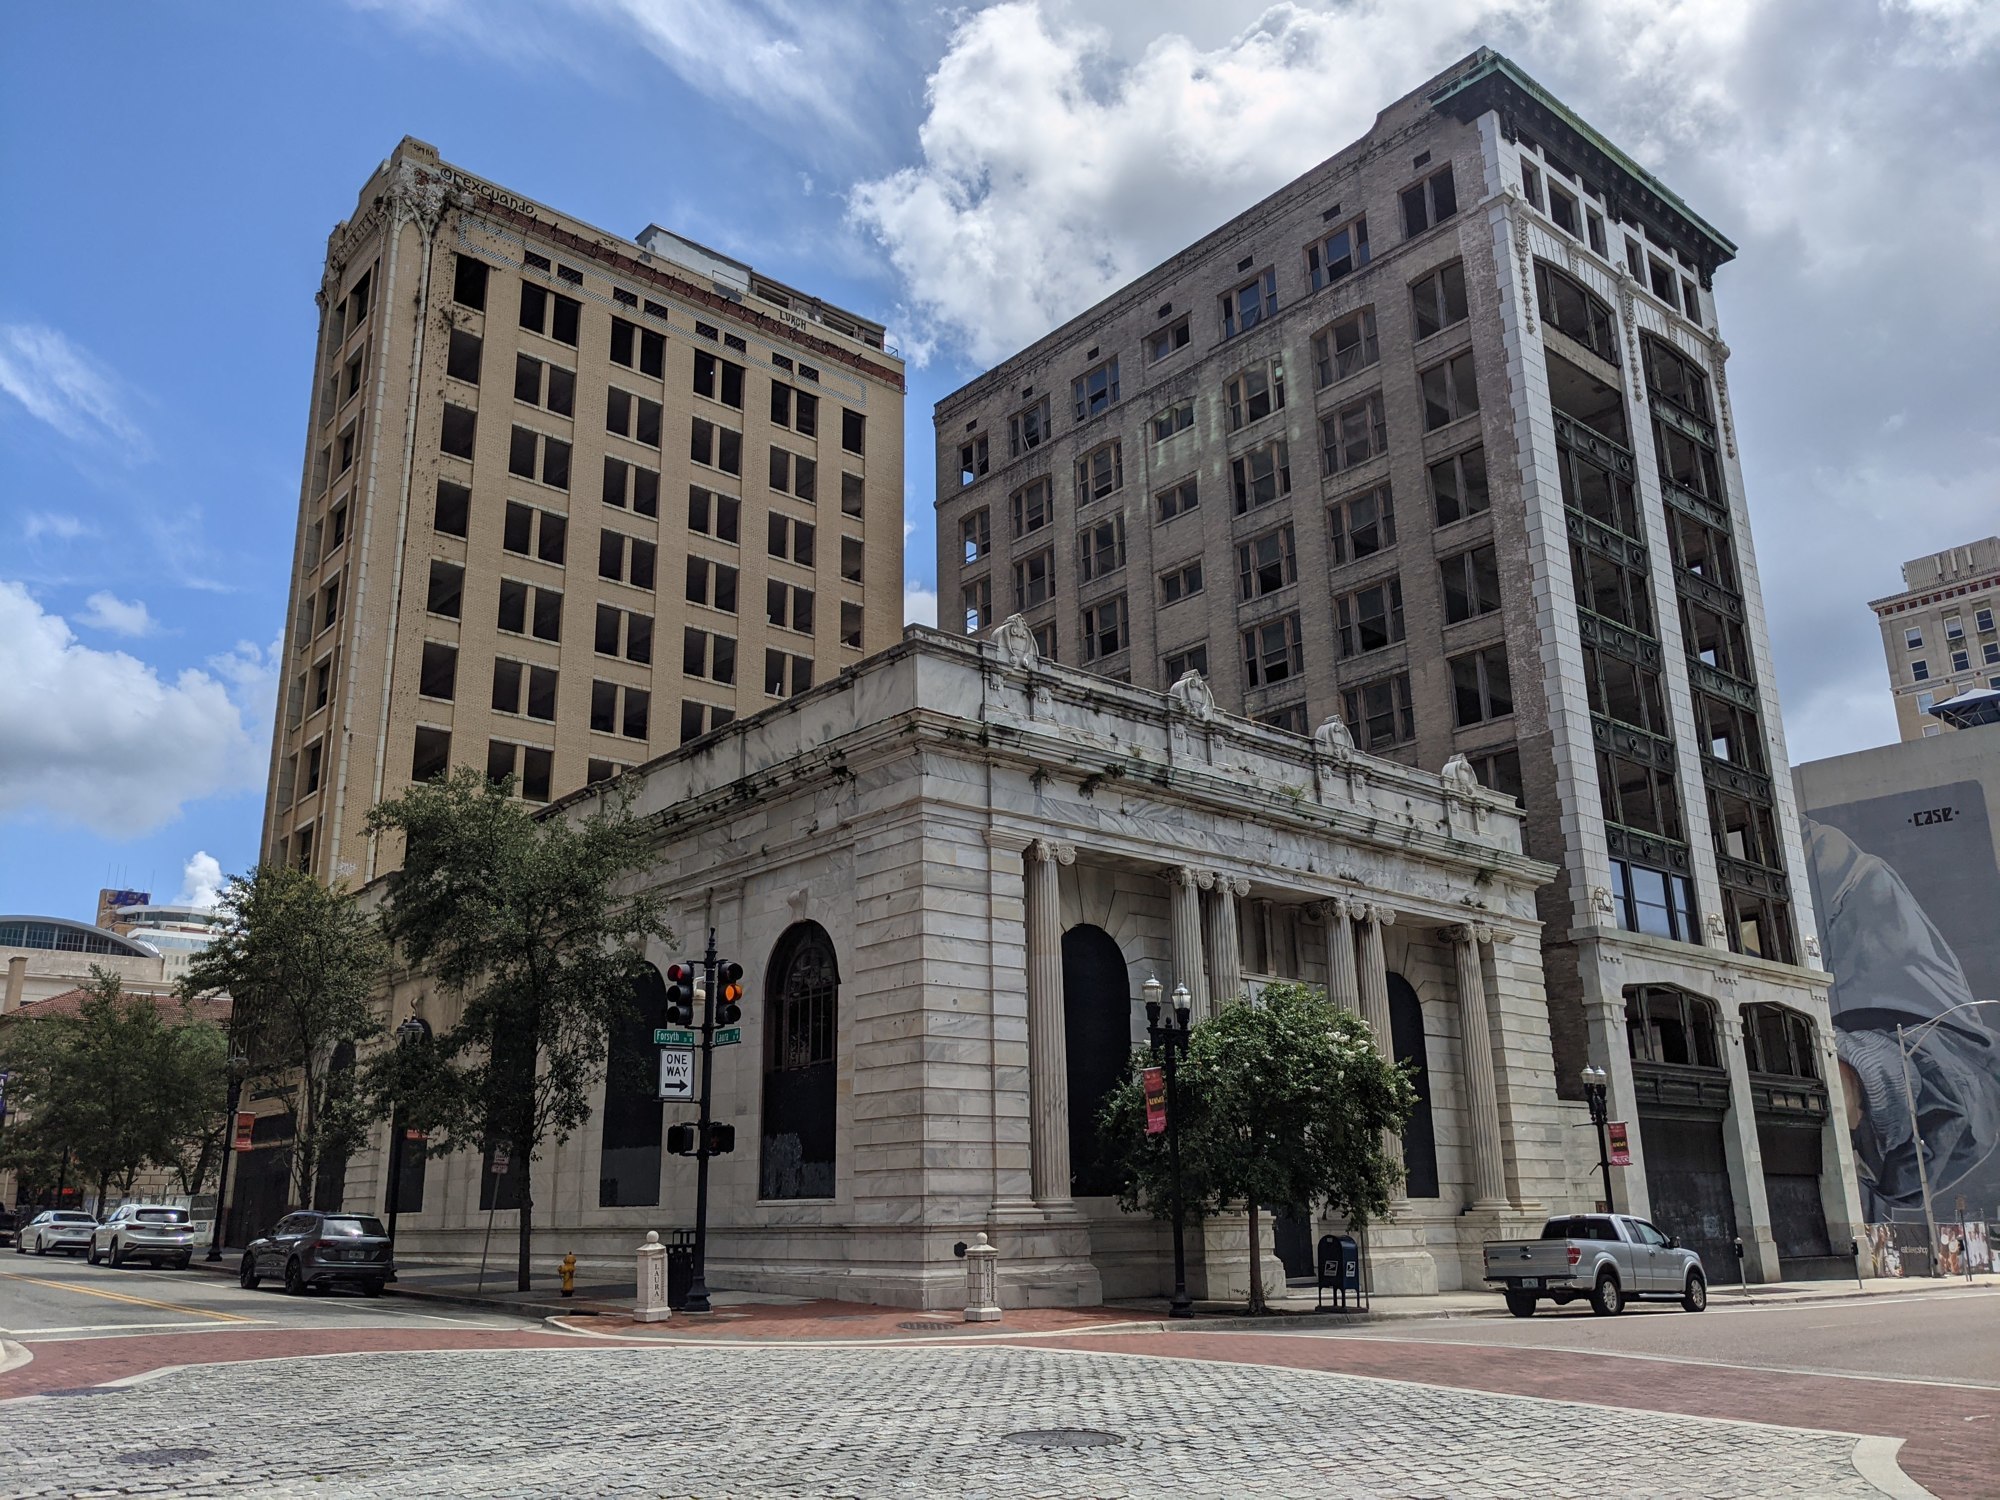 The historic Laura Street Trio at the corner of Laura and Forsyth streets in Downtown Jacksonville.